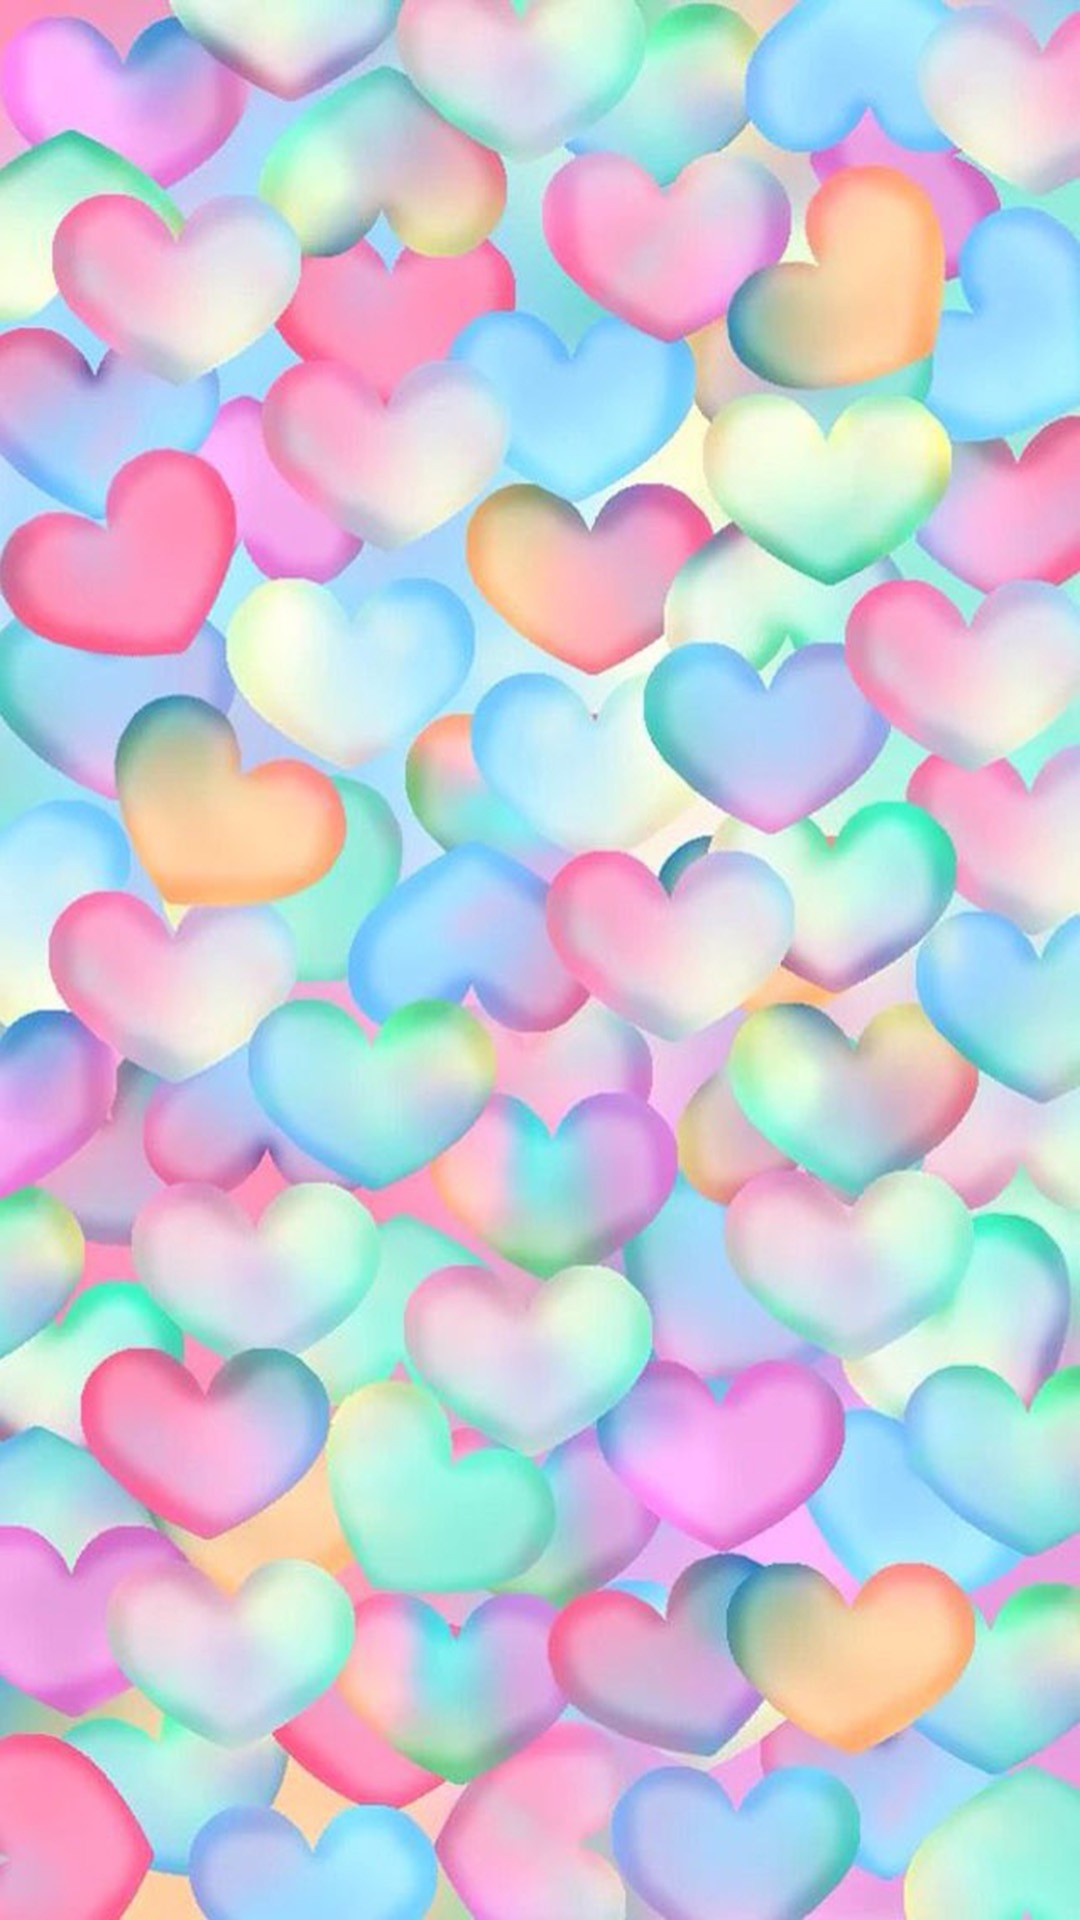 1080x1920 Explore Rainbow Heart, Iphone Wallpapers, and more!